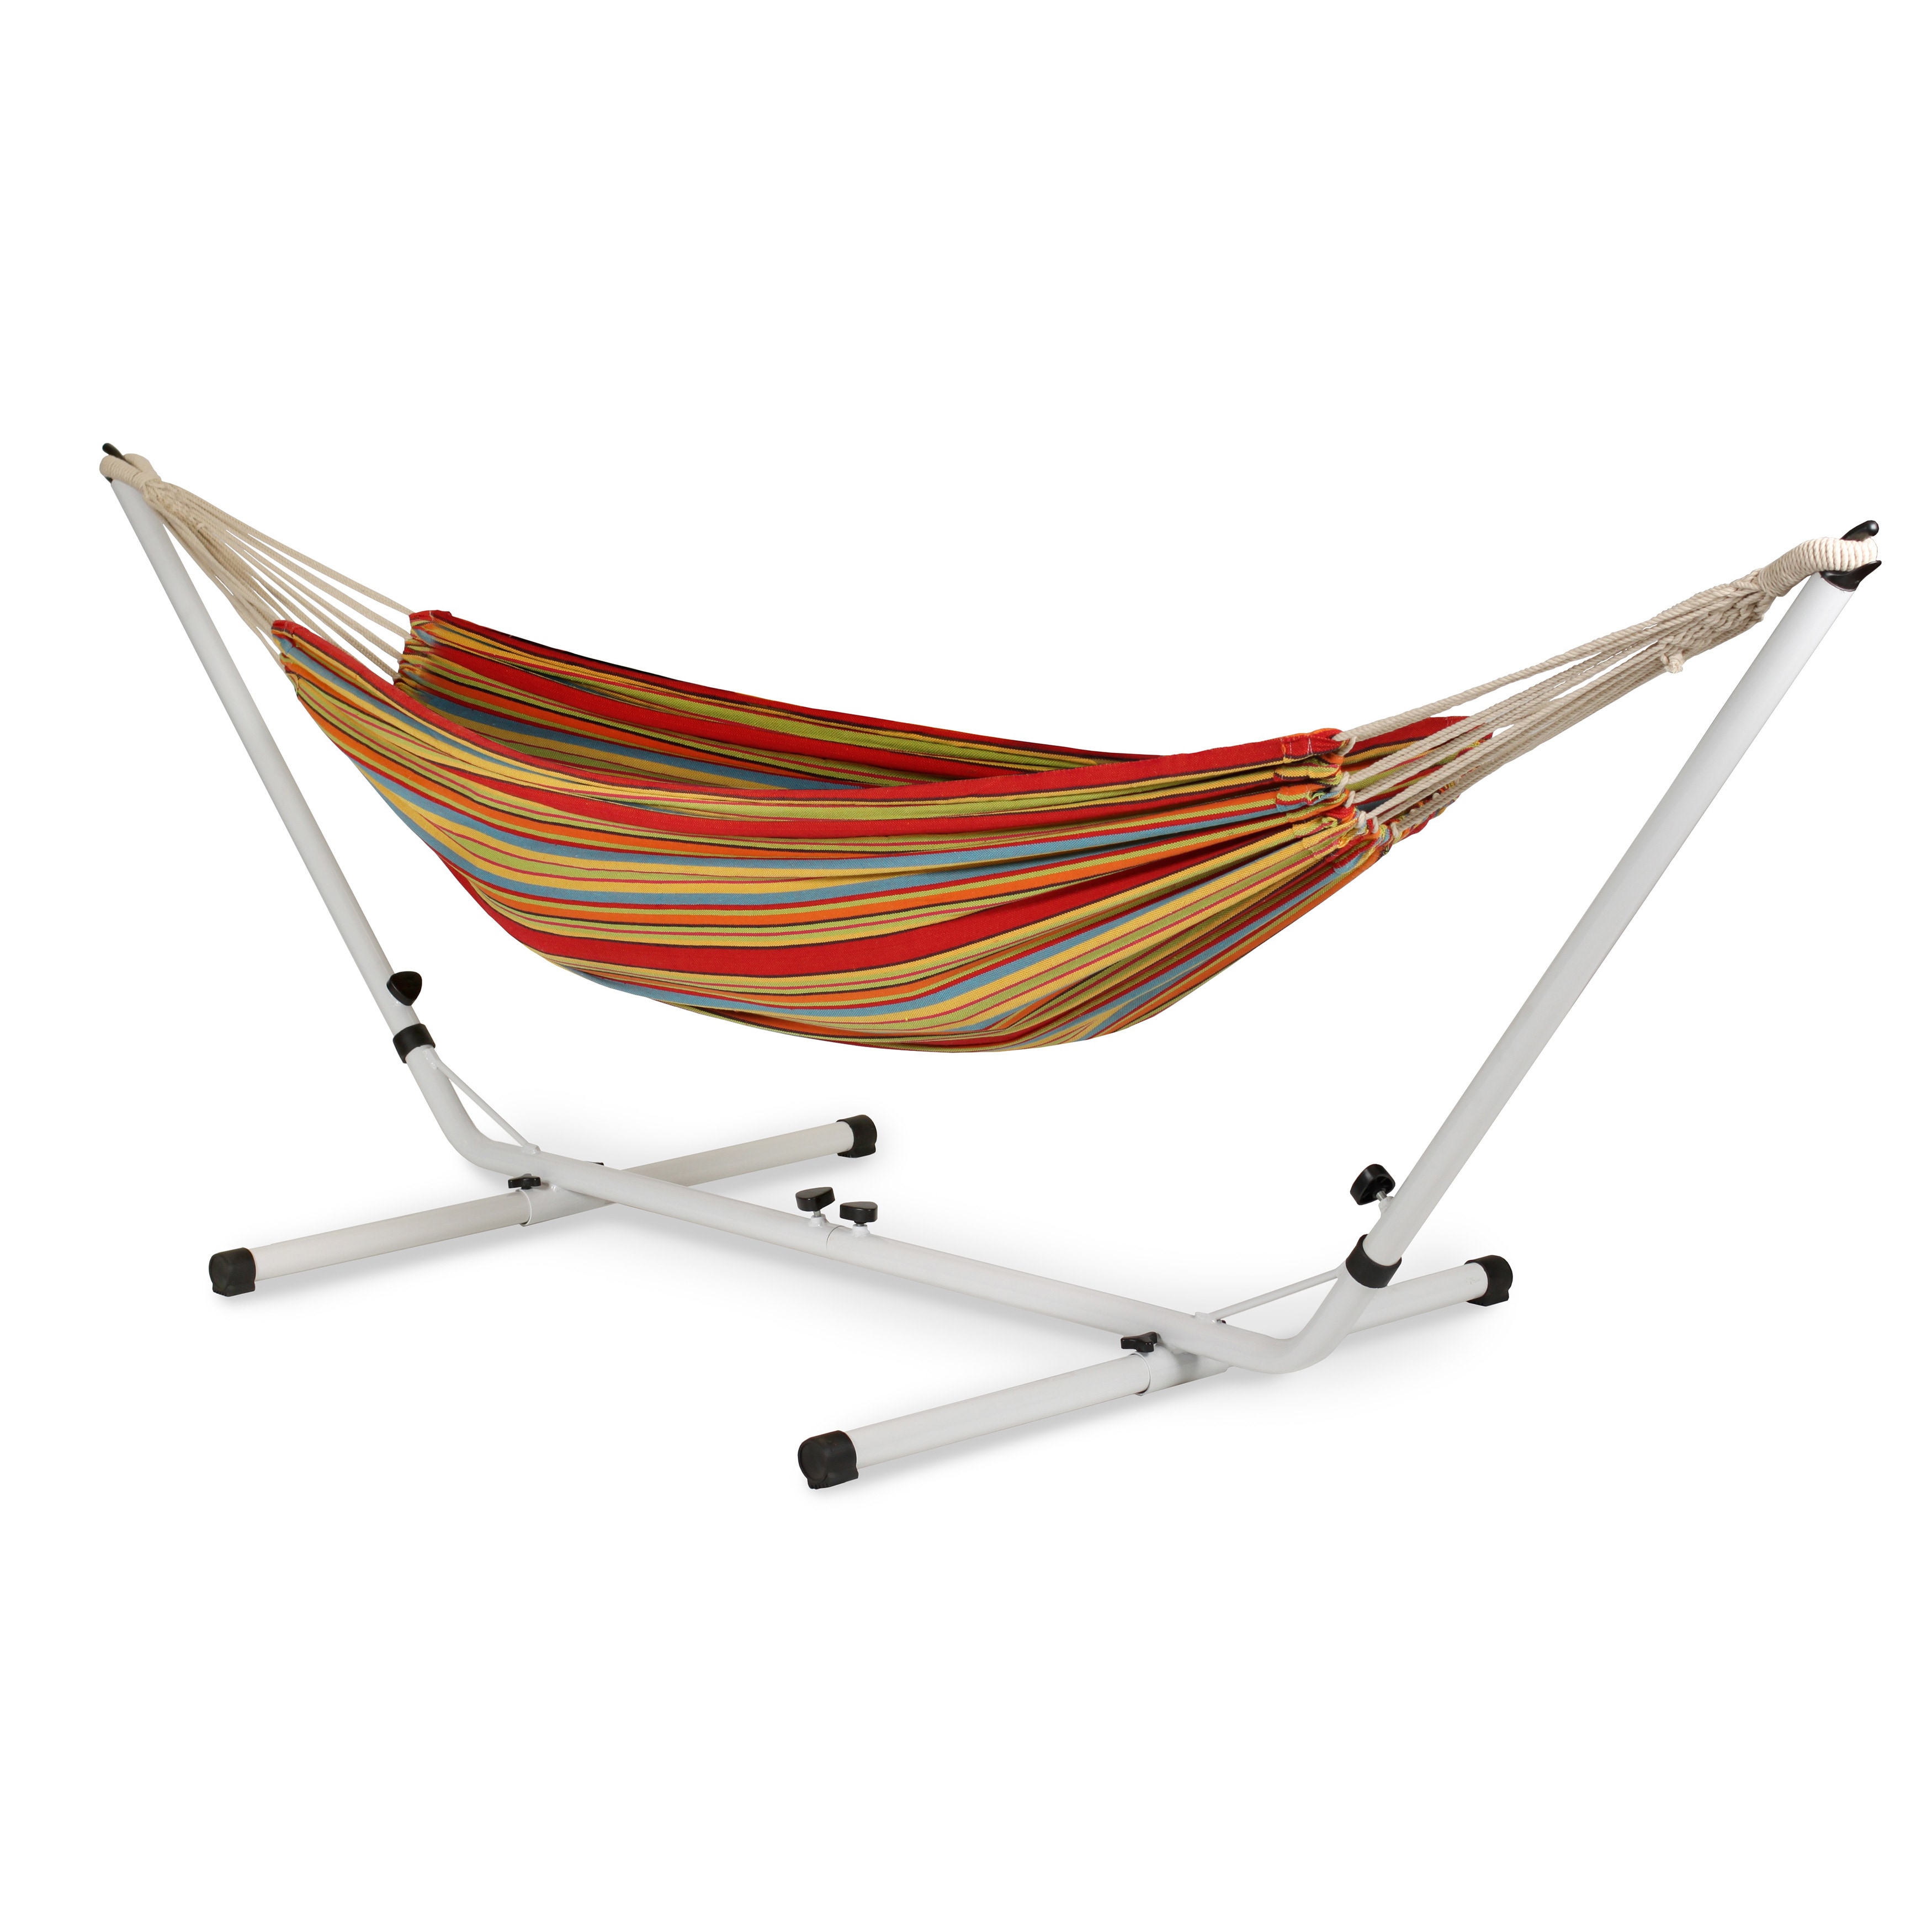 Stansport Brazilian Hammock Stand Combo Cotton Canvas - image 2 of 2